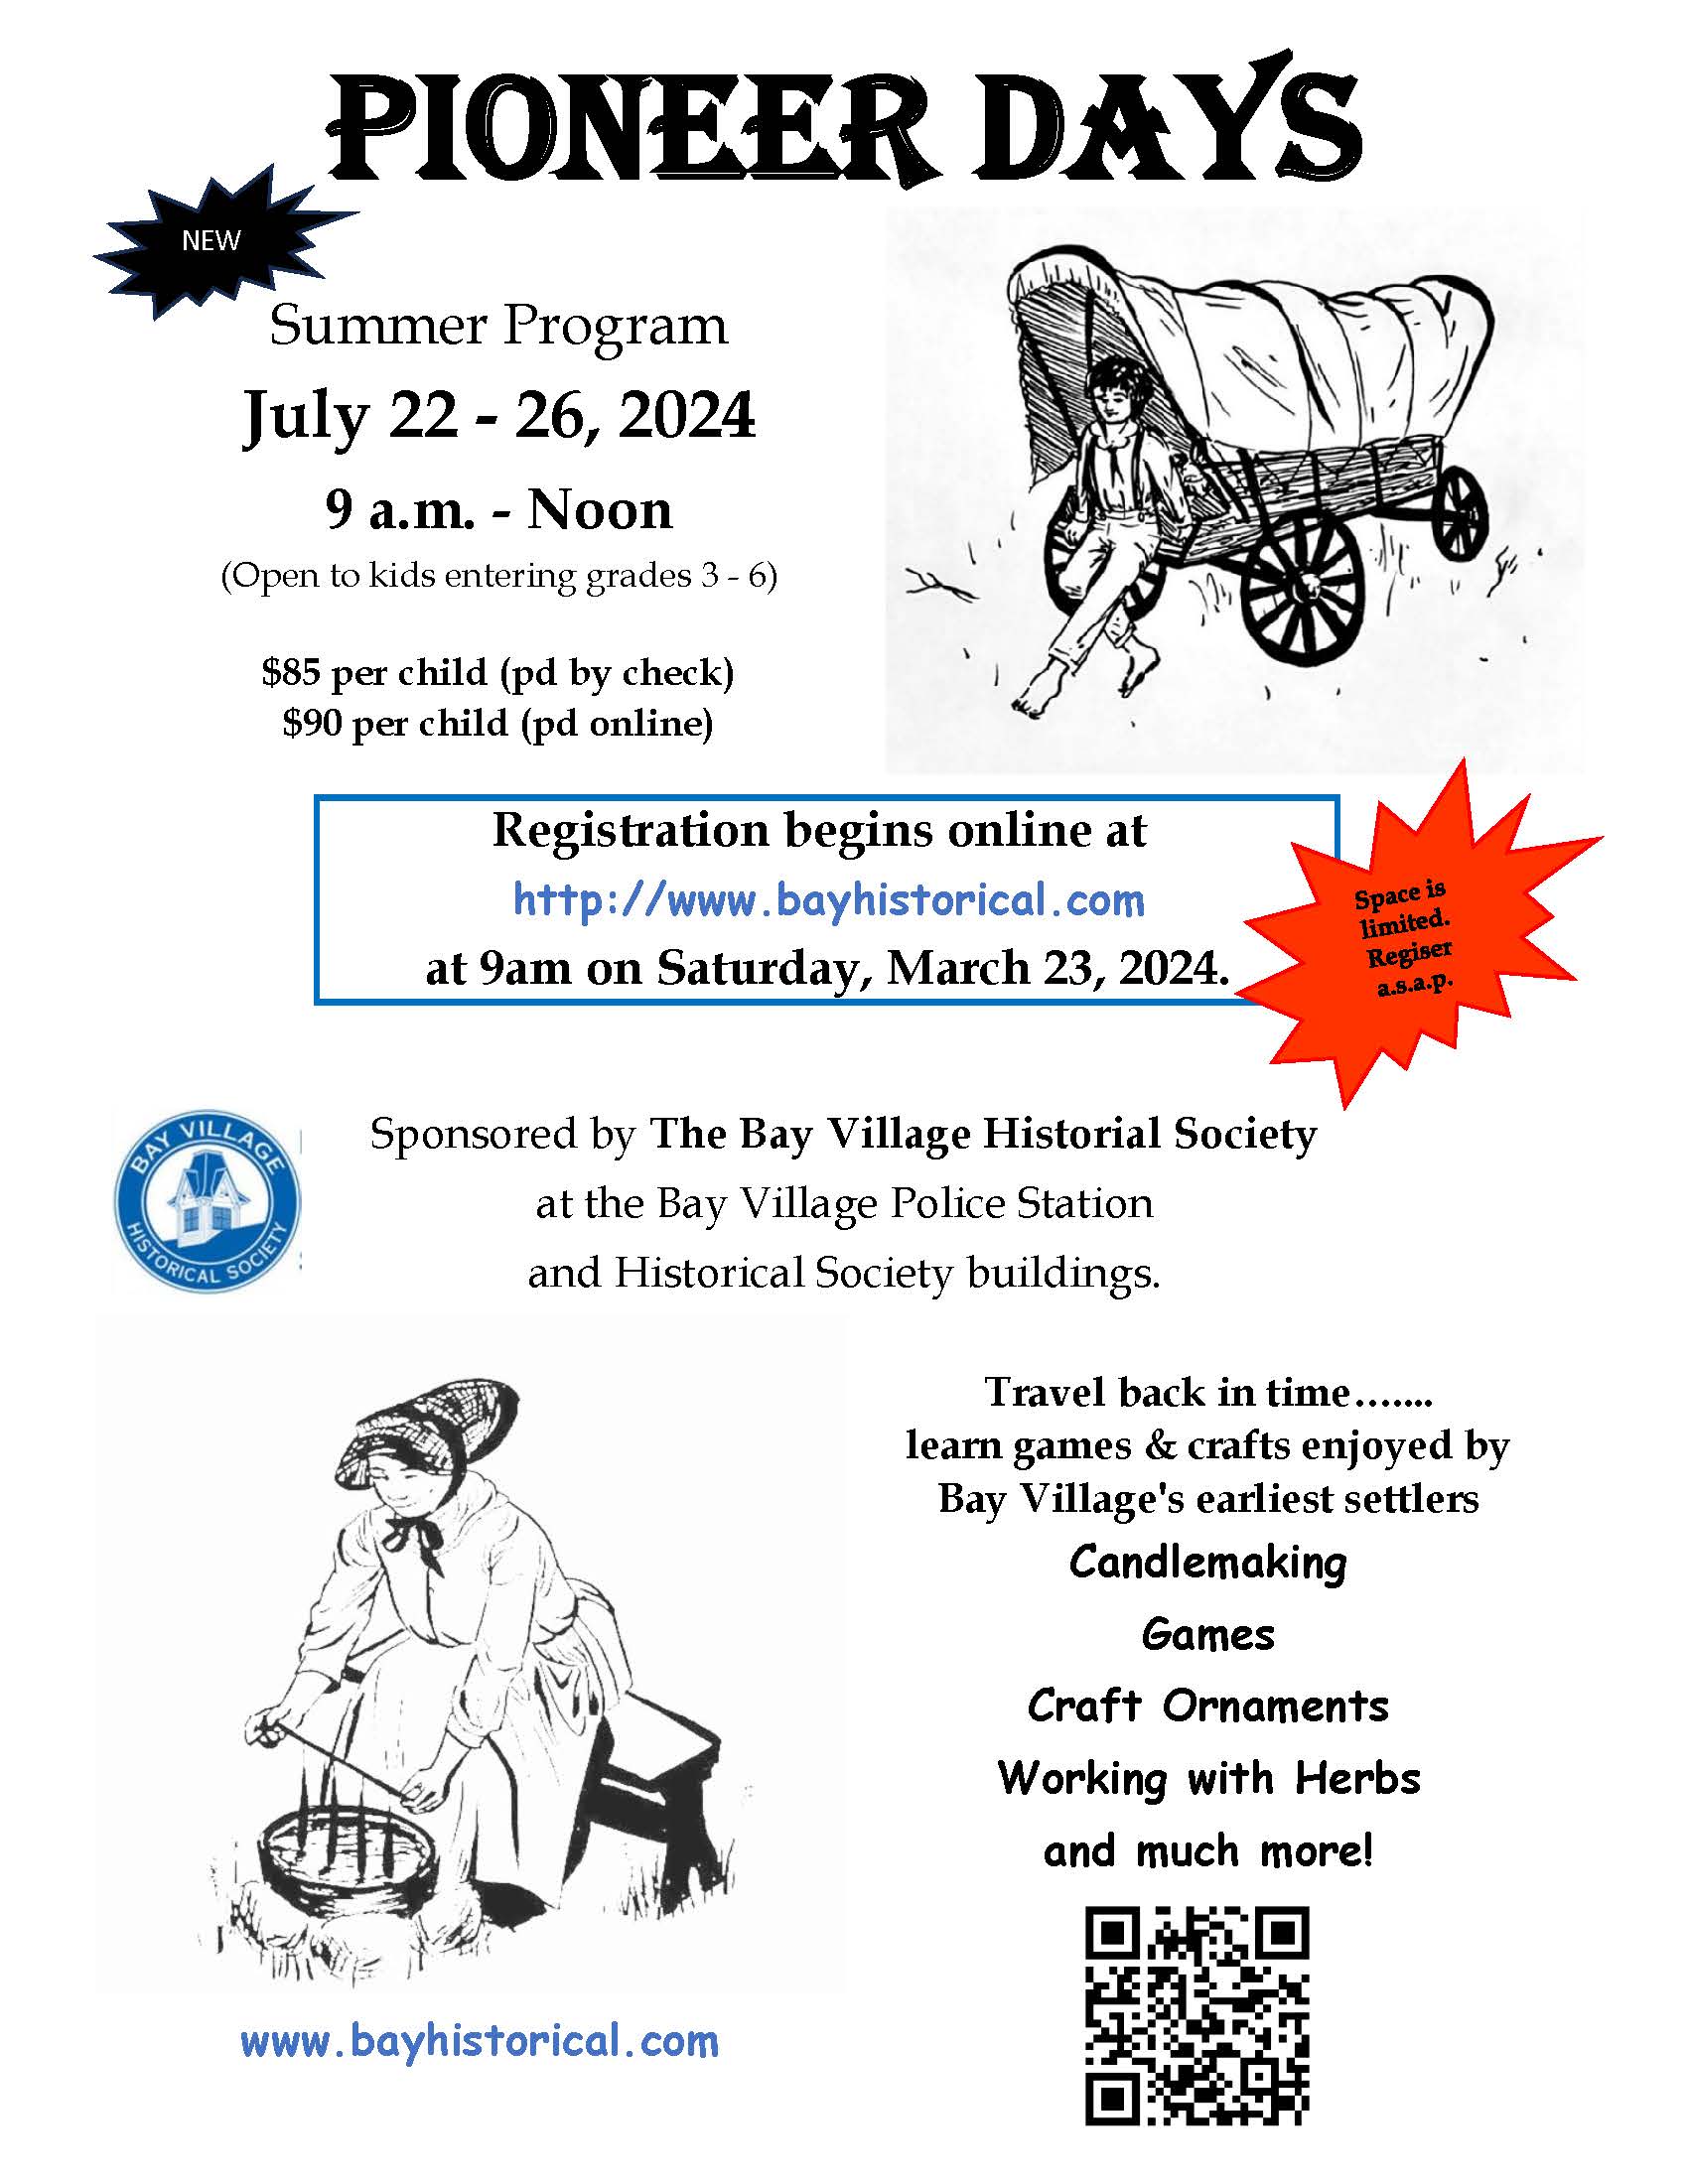 Pioneer Days camp with the Bay Historical Society flyer